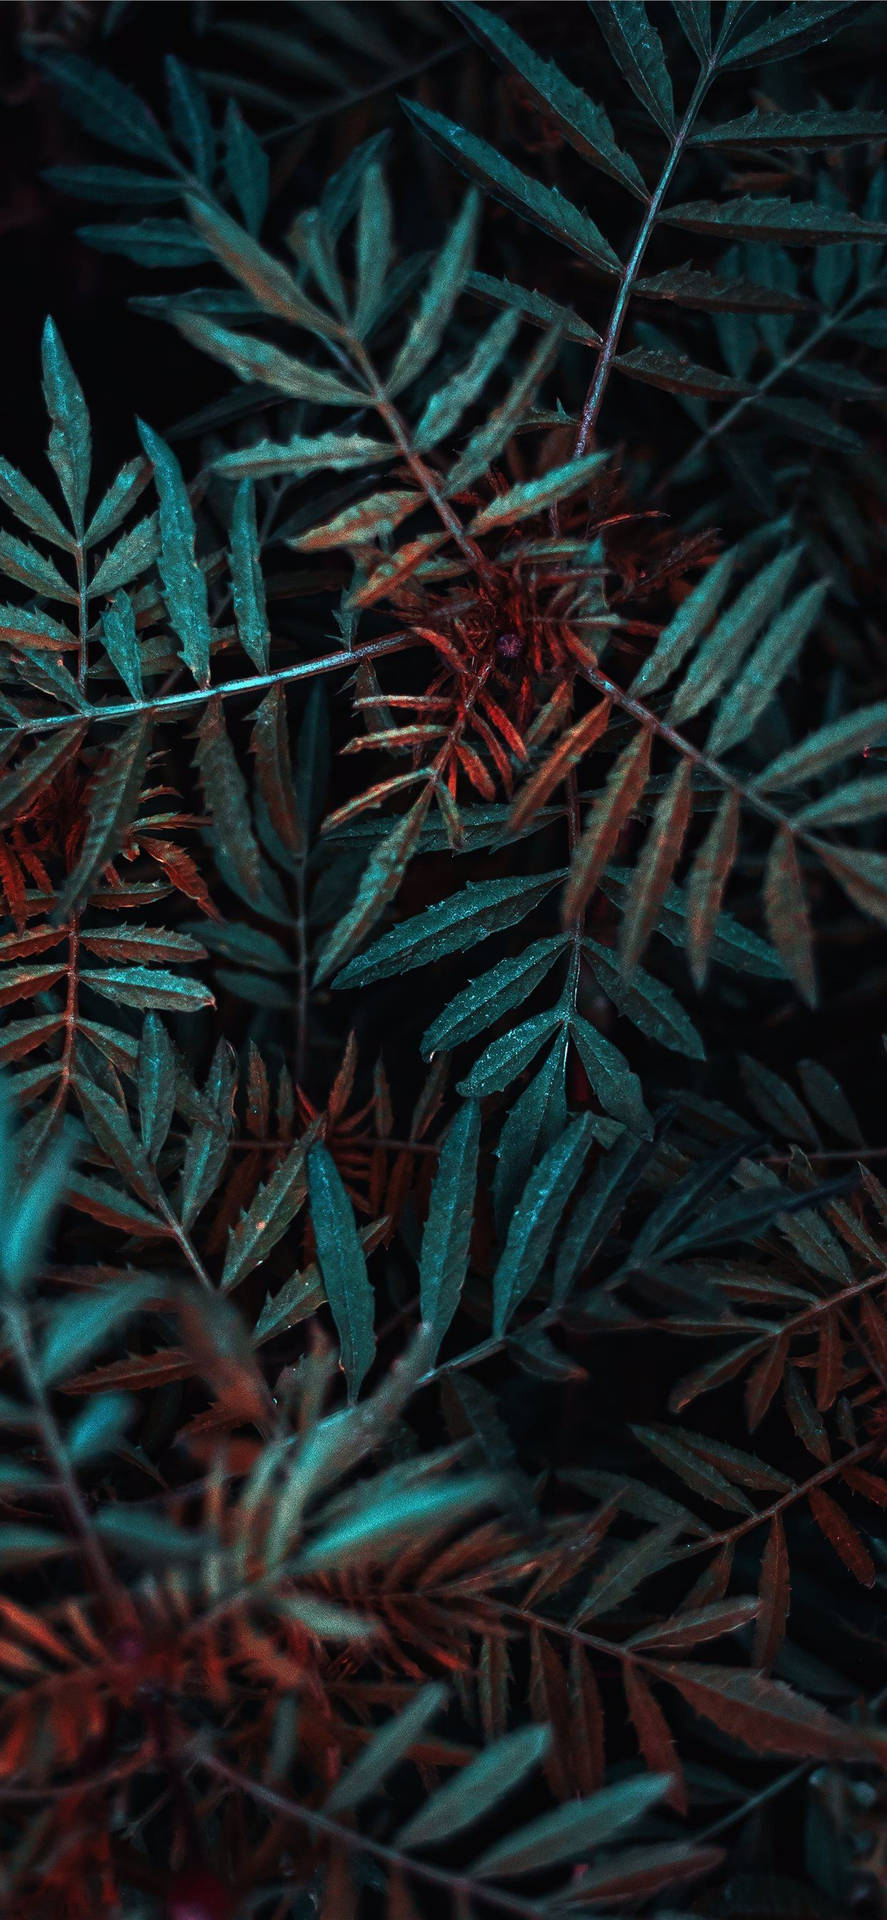 Top 999+ Plants Wallpaper Full HD, 4K✅Free to Use